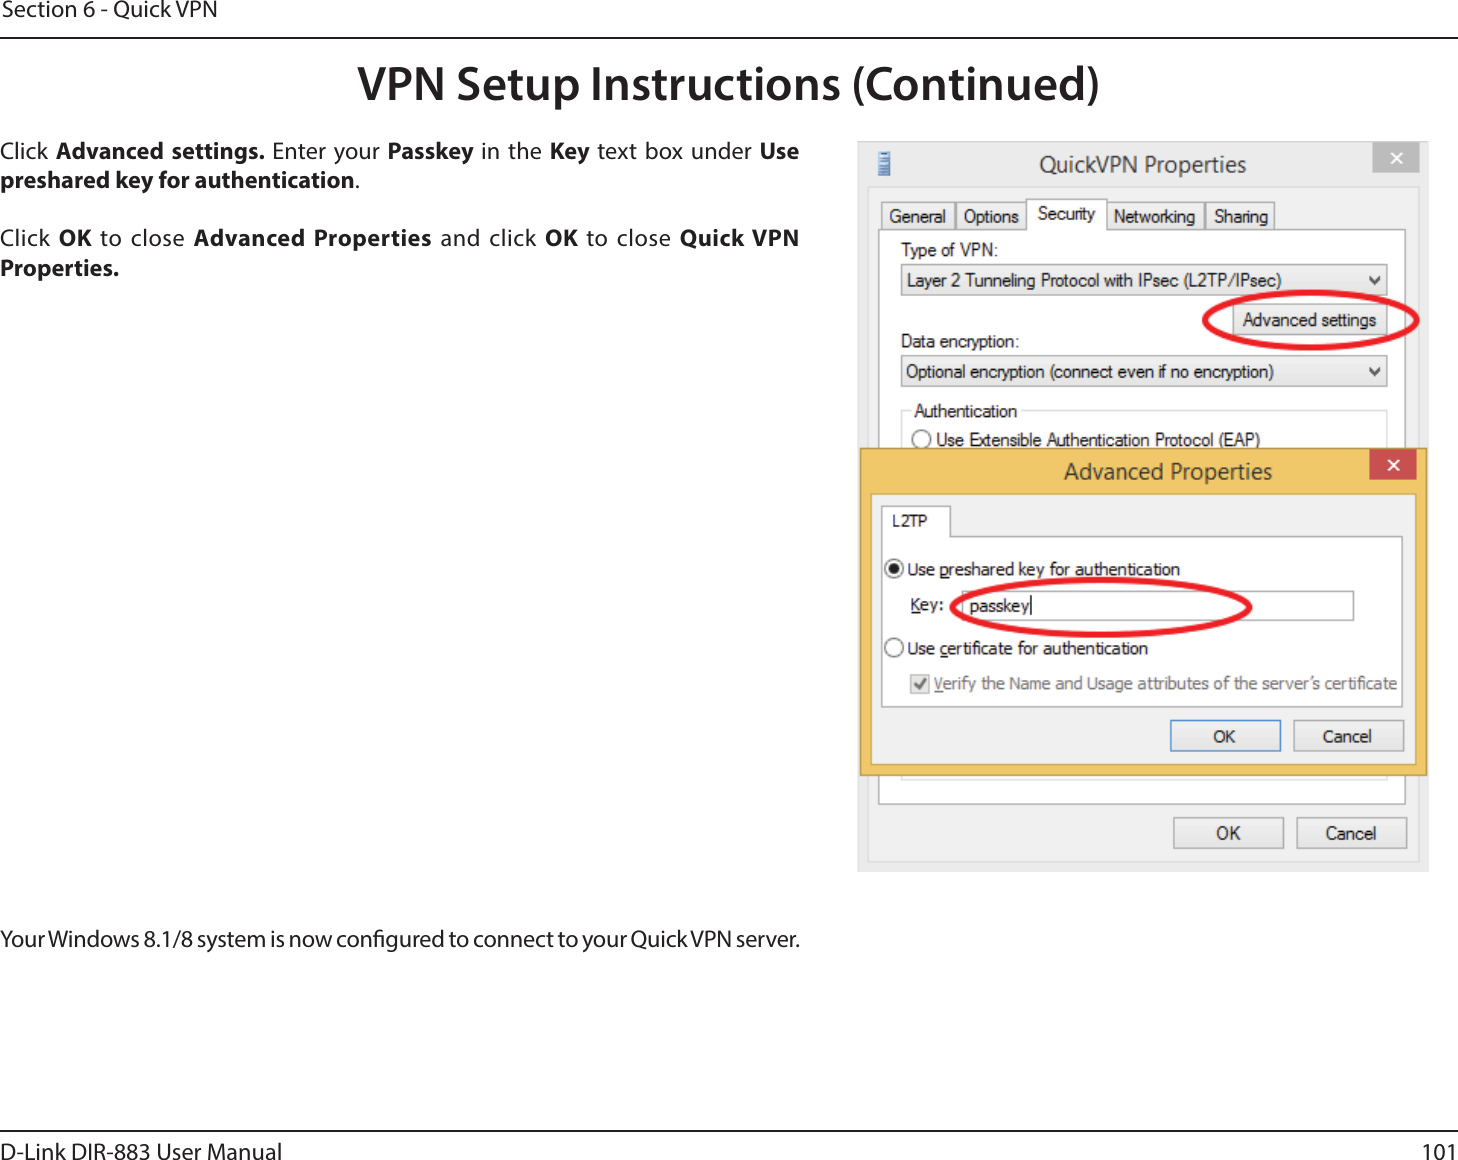 101D-Link DIR-883 User ManualSection 6 - Quick VPNClick Advanced settings. Enter your Passkey in the Key text box under Use preshared key for authentication. Click OK to close Advanced Properties and click OK to close Quick VPN Properties.Your Windows 8.1/8 system is now congured to connect to your Quick VPN server.VPN Setup Instructions (Continued)